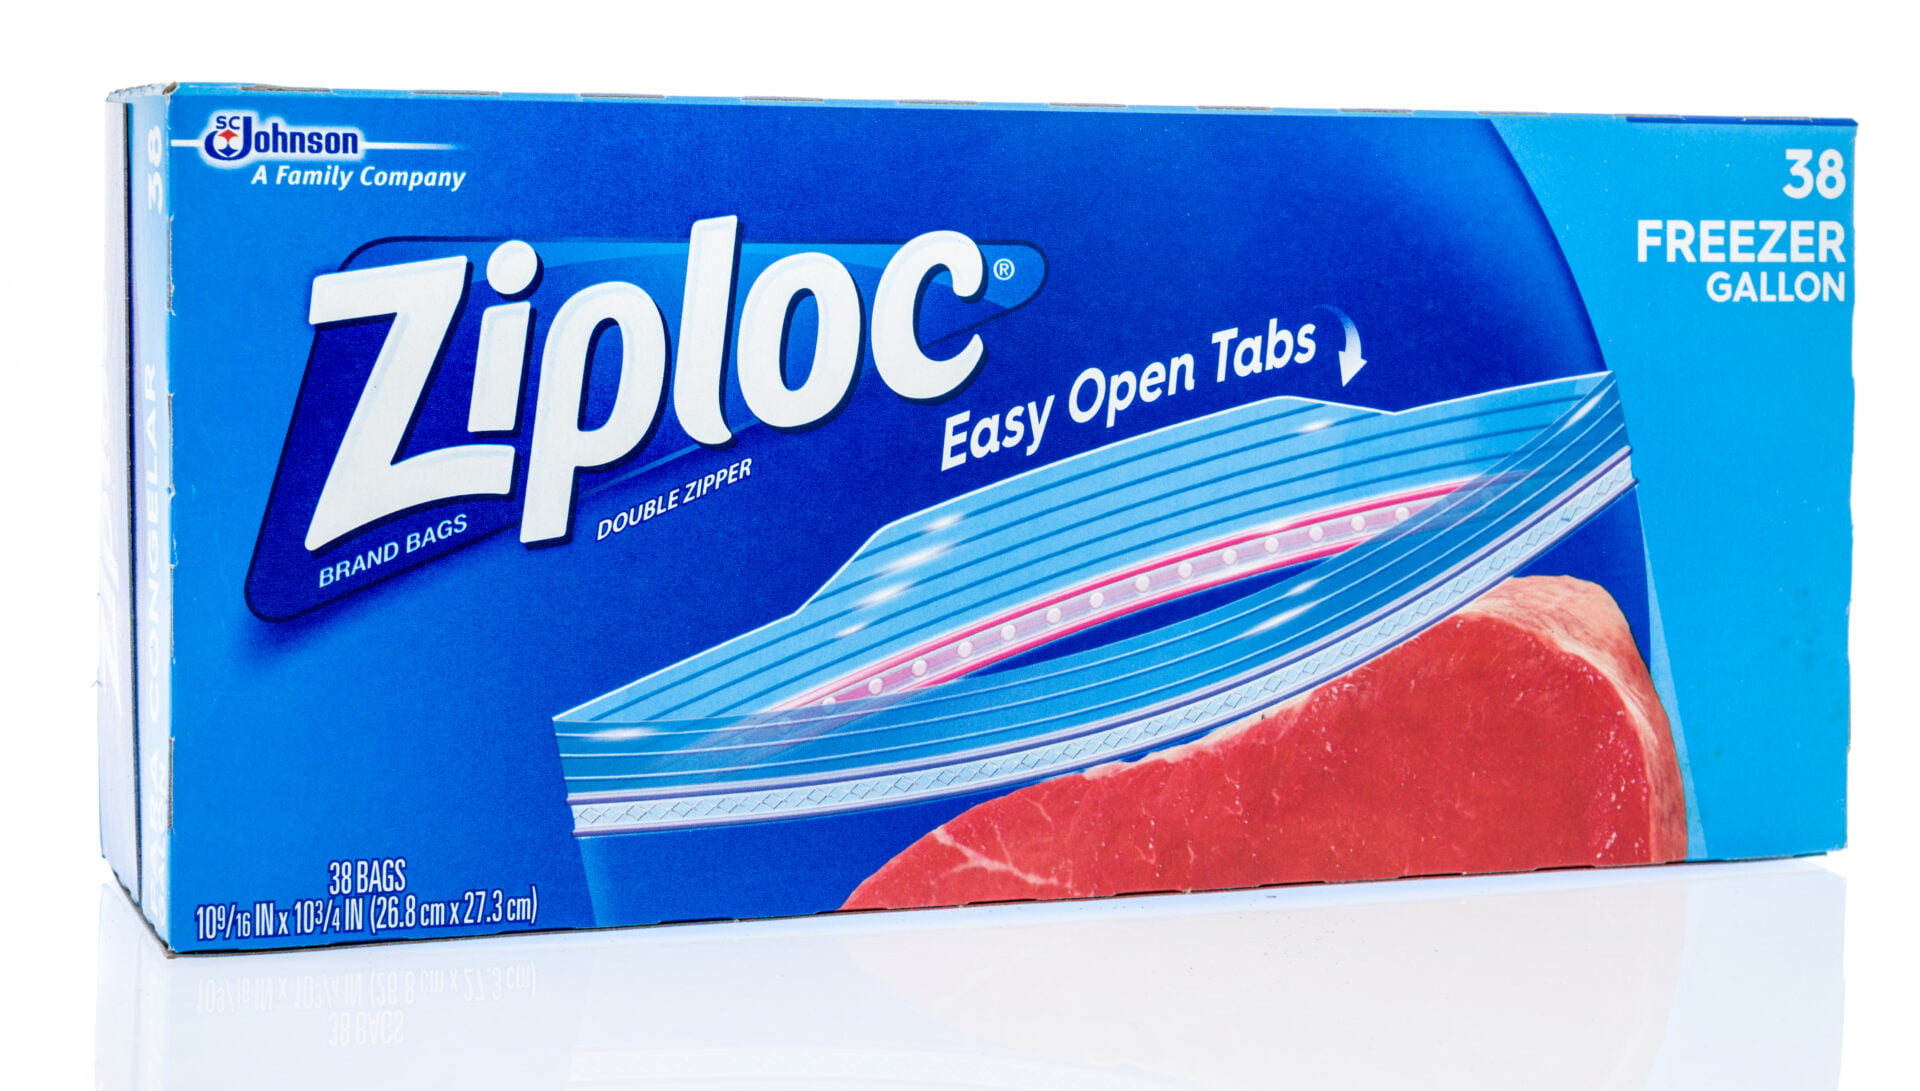 Ziploc plastic sandwich bags without indications of PFAS "forever chemicals" 